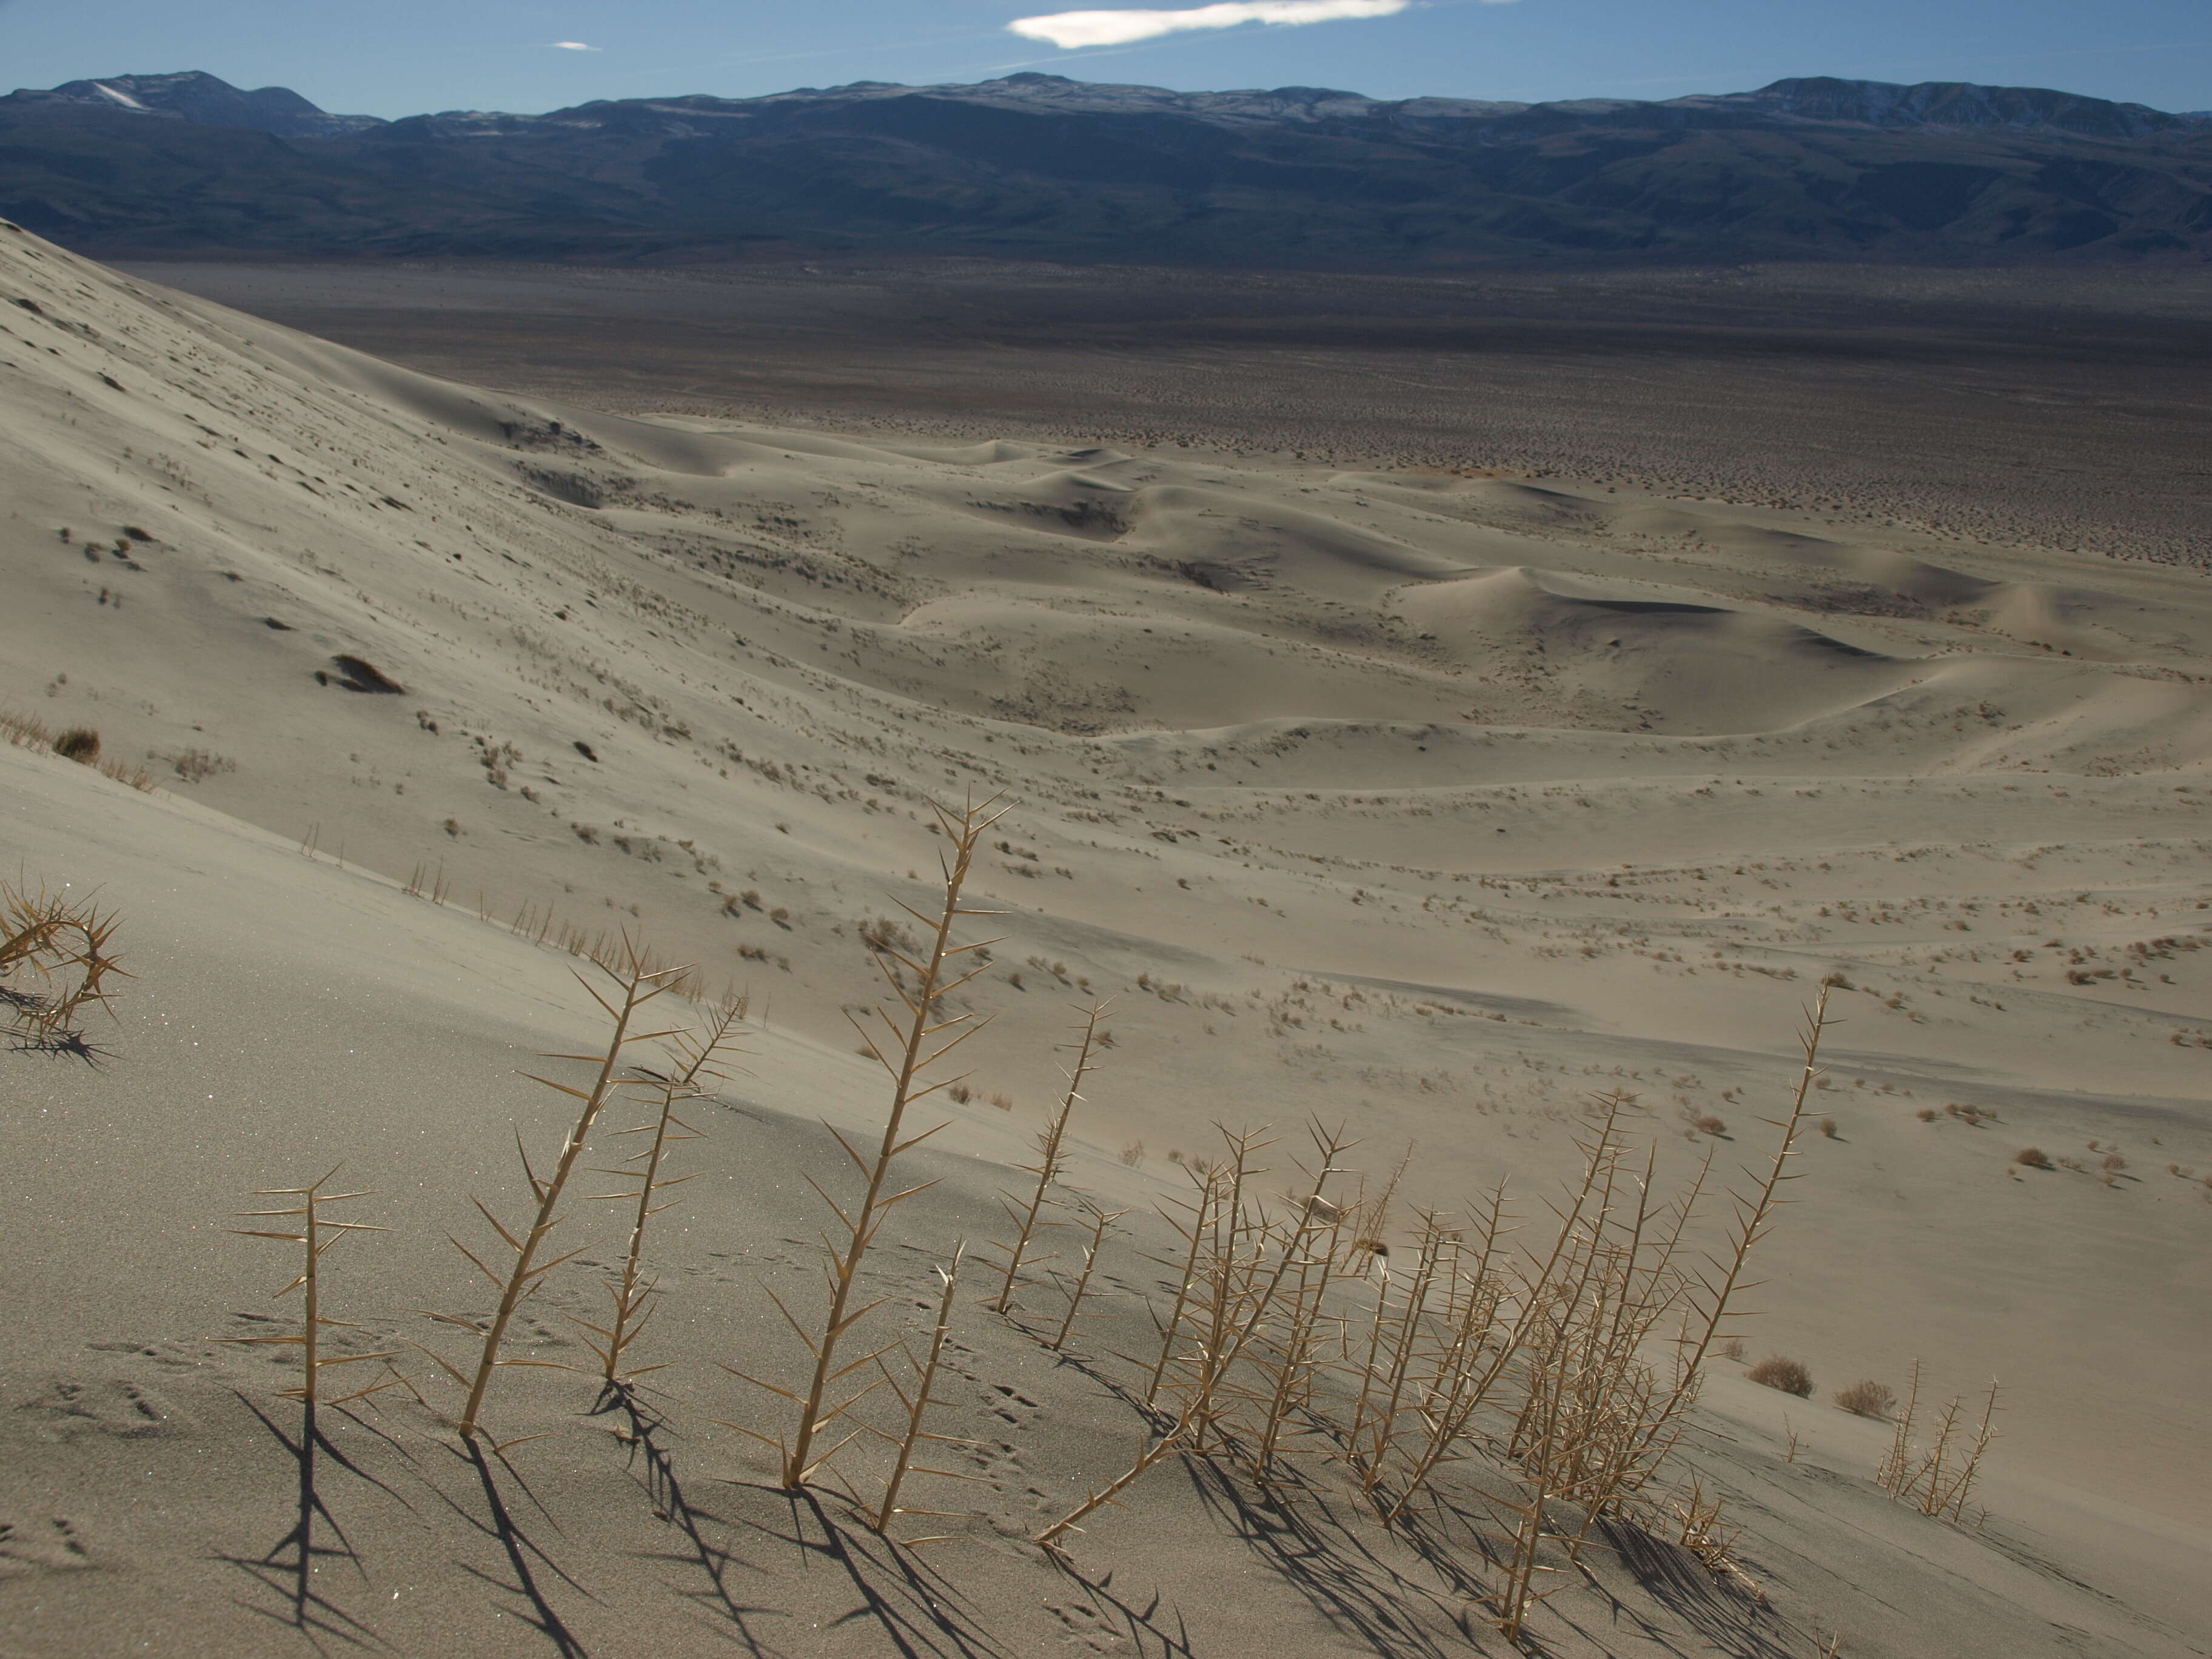 Image of dunegrass